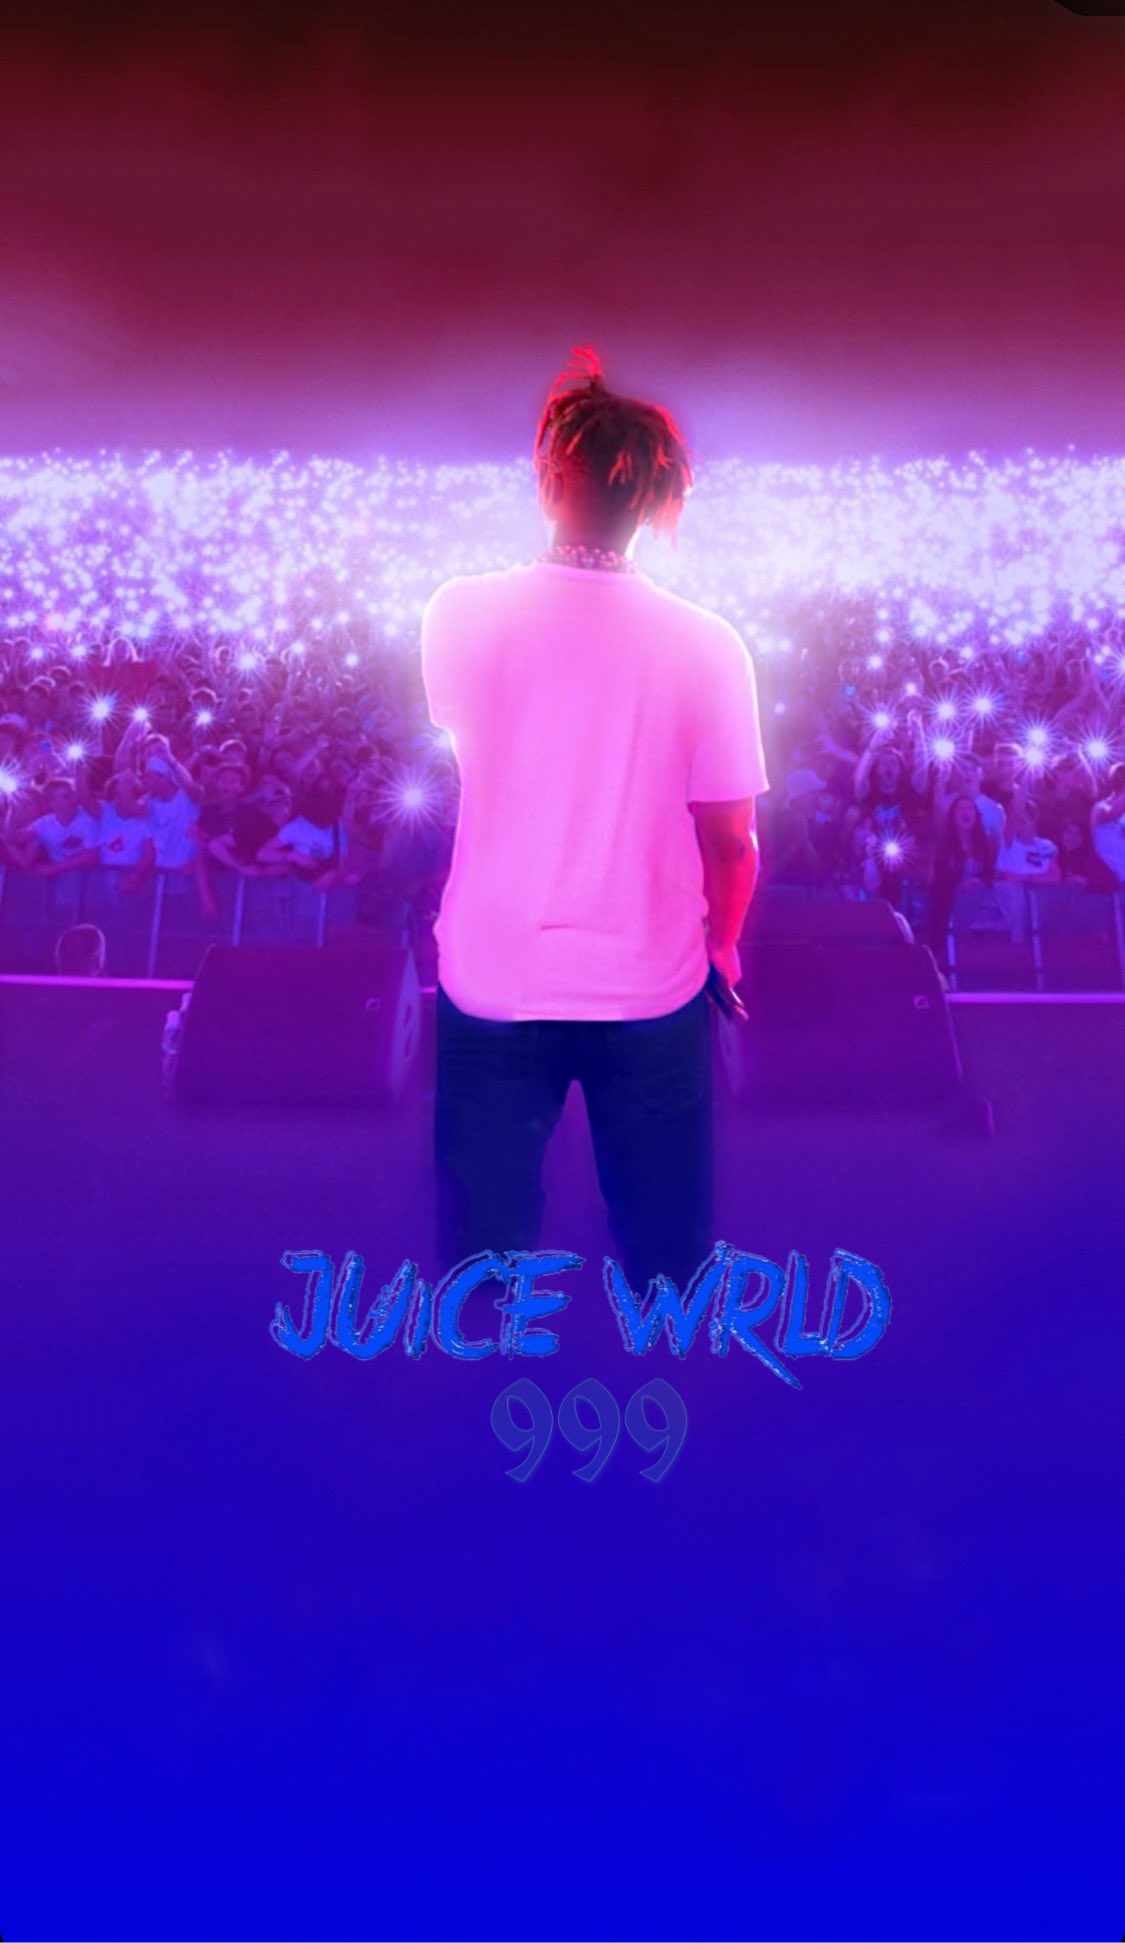 INTO THE ABYSS 999 The Abyss Wallpaper #juicewrld #juicewrldart #ripjuicewrld #juicewrldcoverart family #juicewrld #juicewridedits #uicewrld999 #llj* #juicewrldsnippet #juicewrldleaks #juicewrIdquotes #juicewrldtypebeat